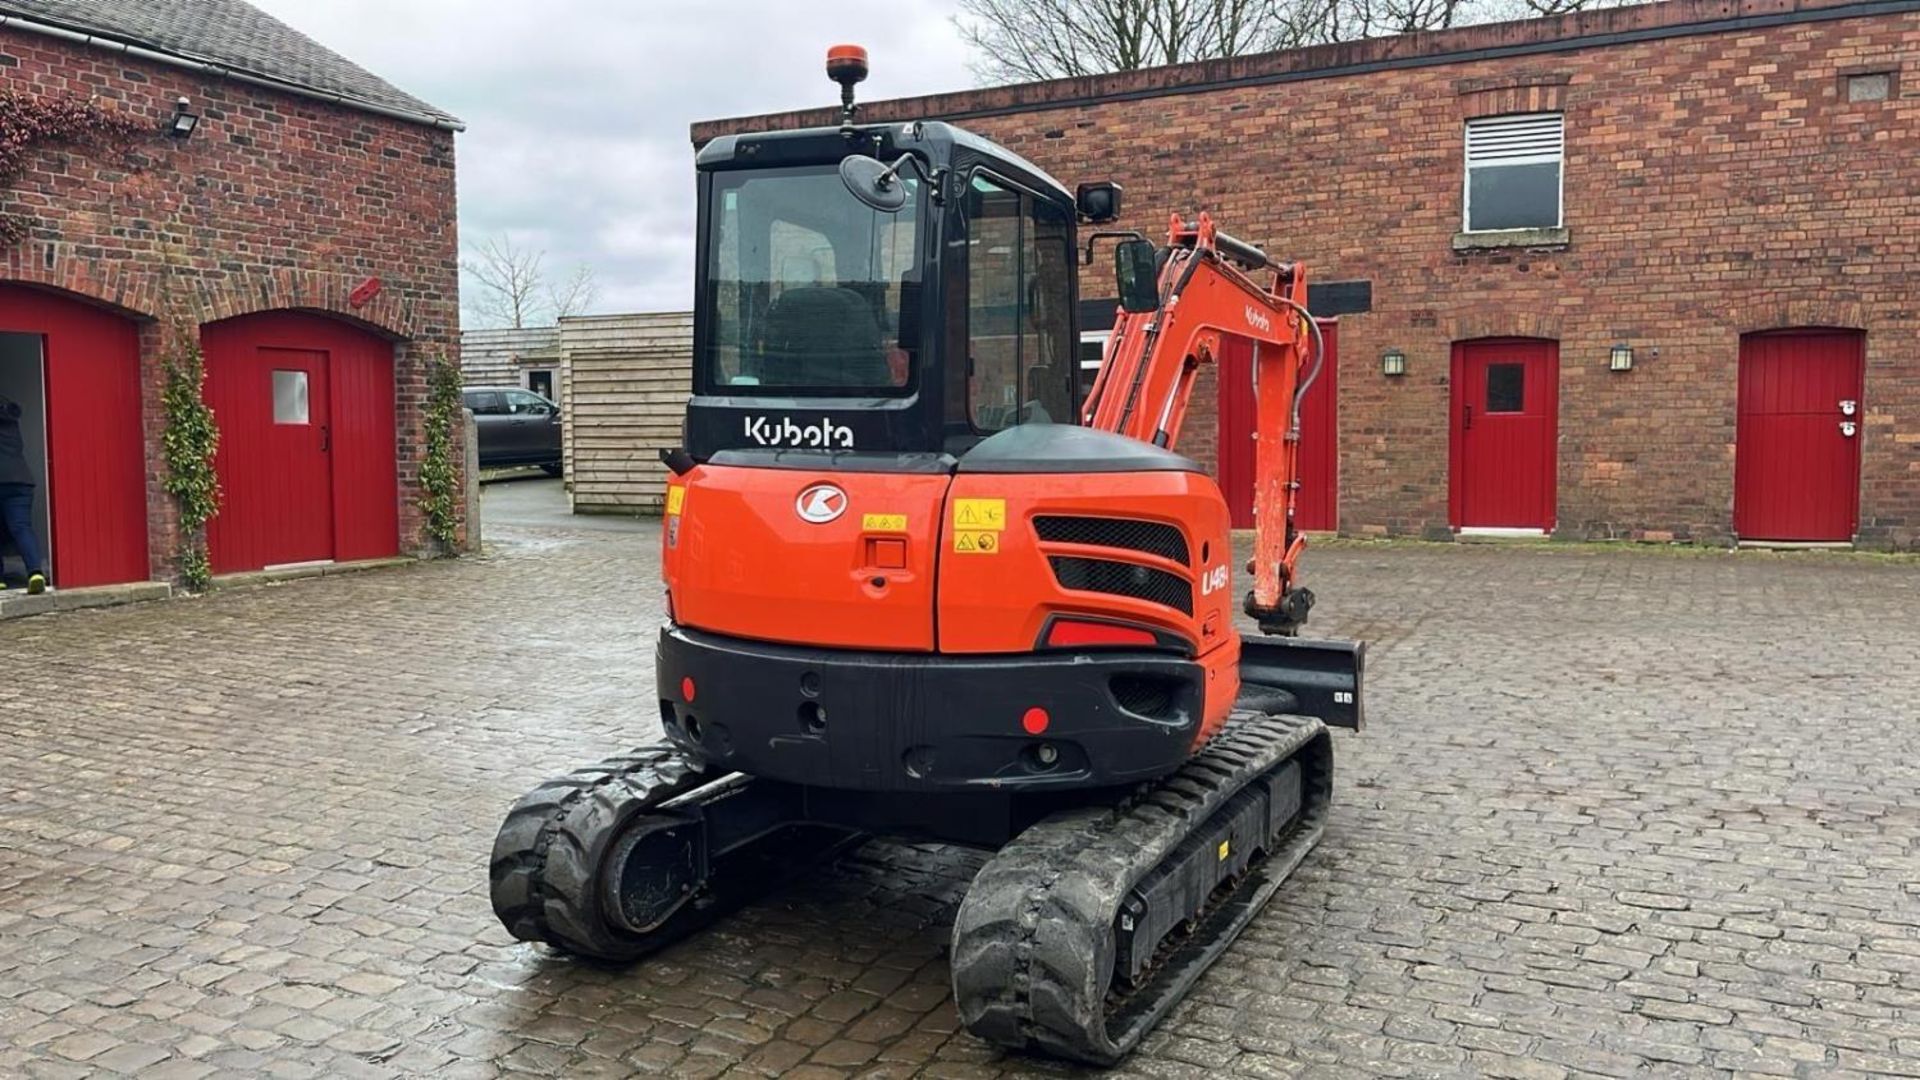 2019 KUBOTA U48-4 COMPACT EXCAVATOR 552 HOURS WITH HYDRAULIC QUICK HITCH TO BE SOLD WITH 4 BUCKETS - Image 5 of 24